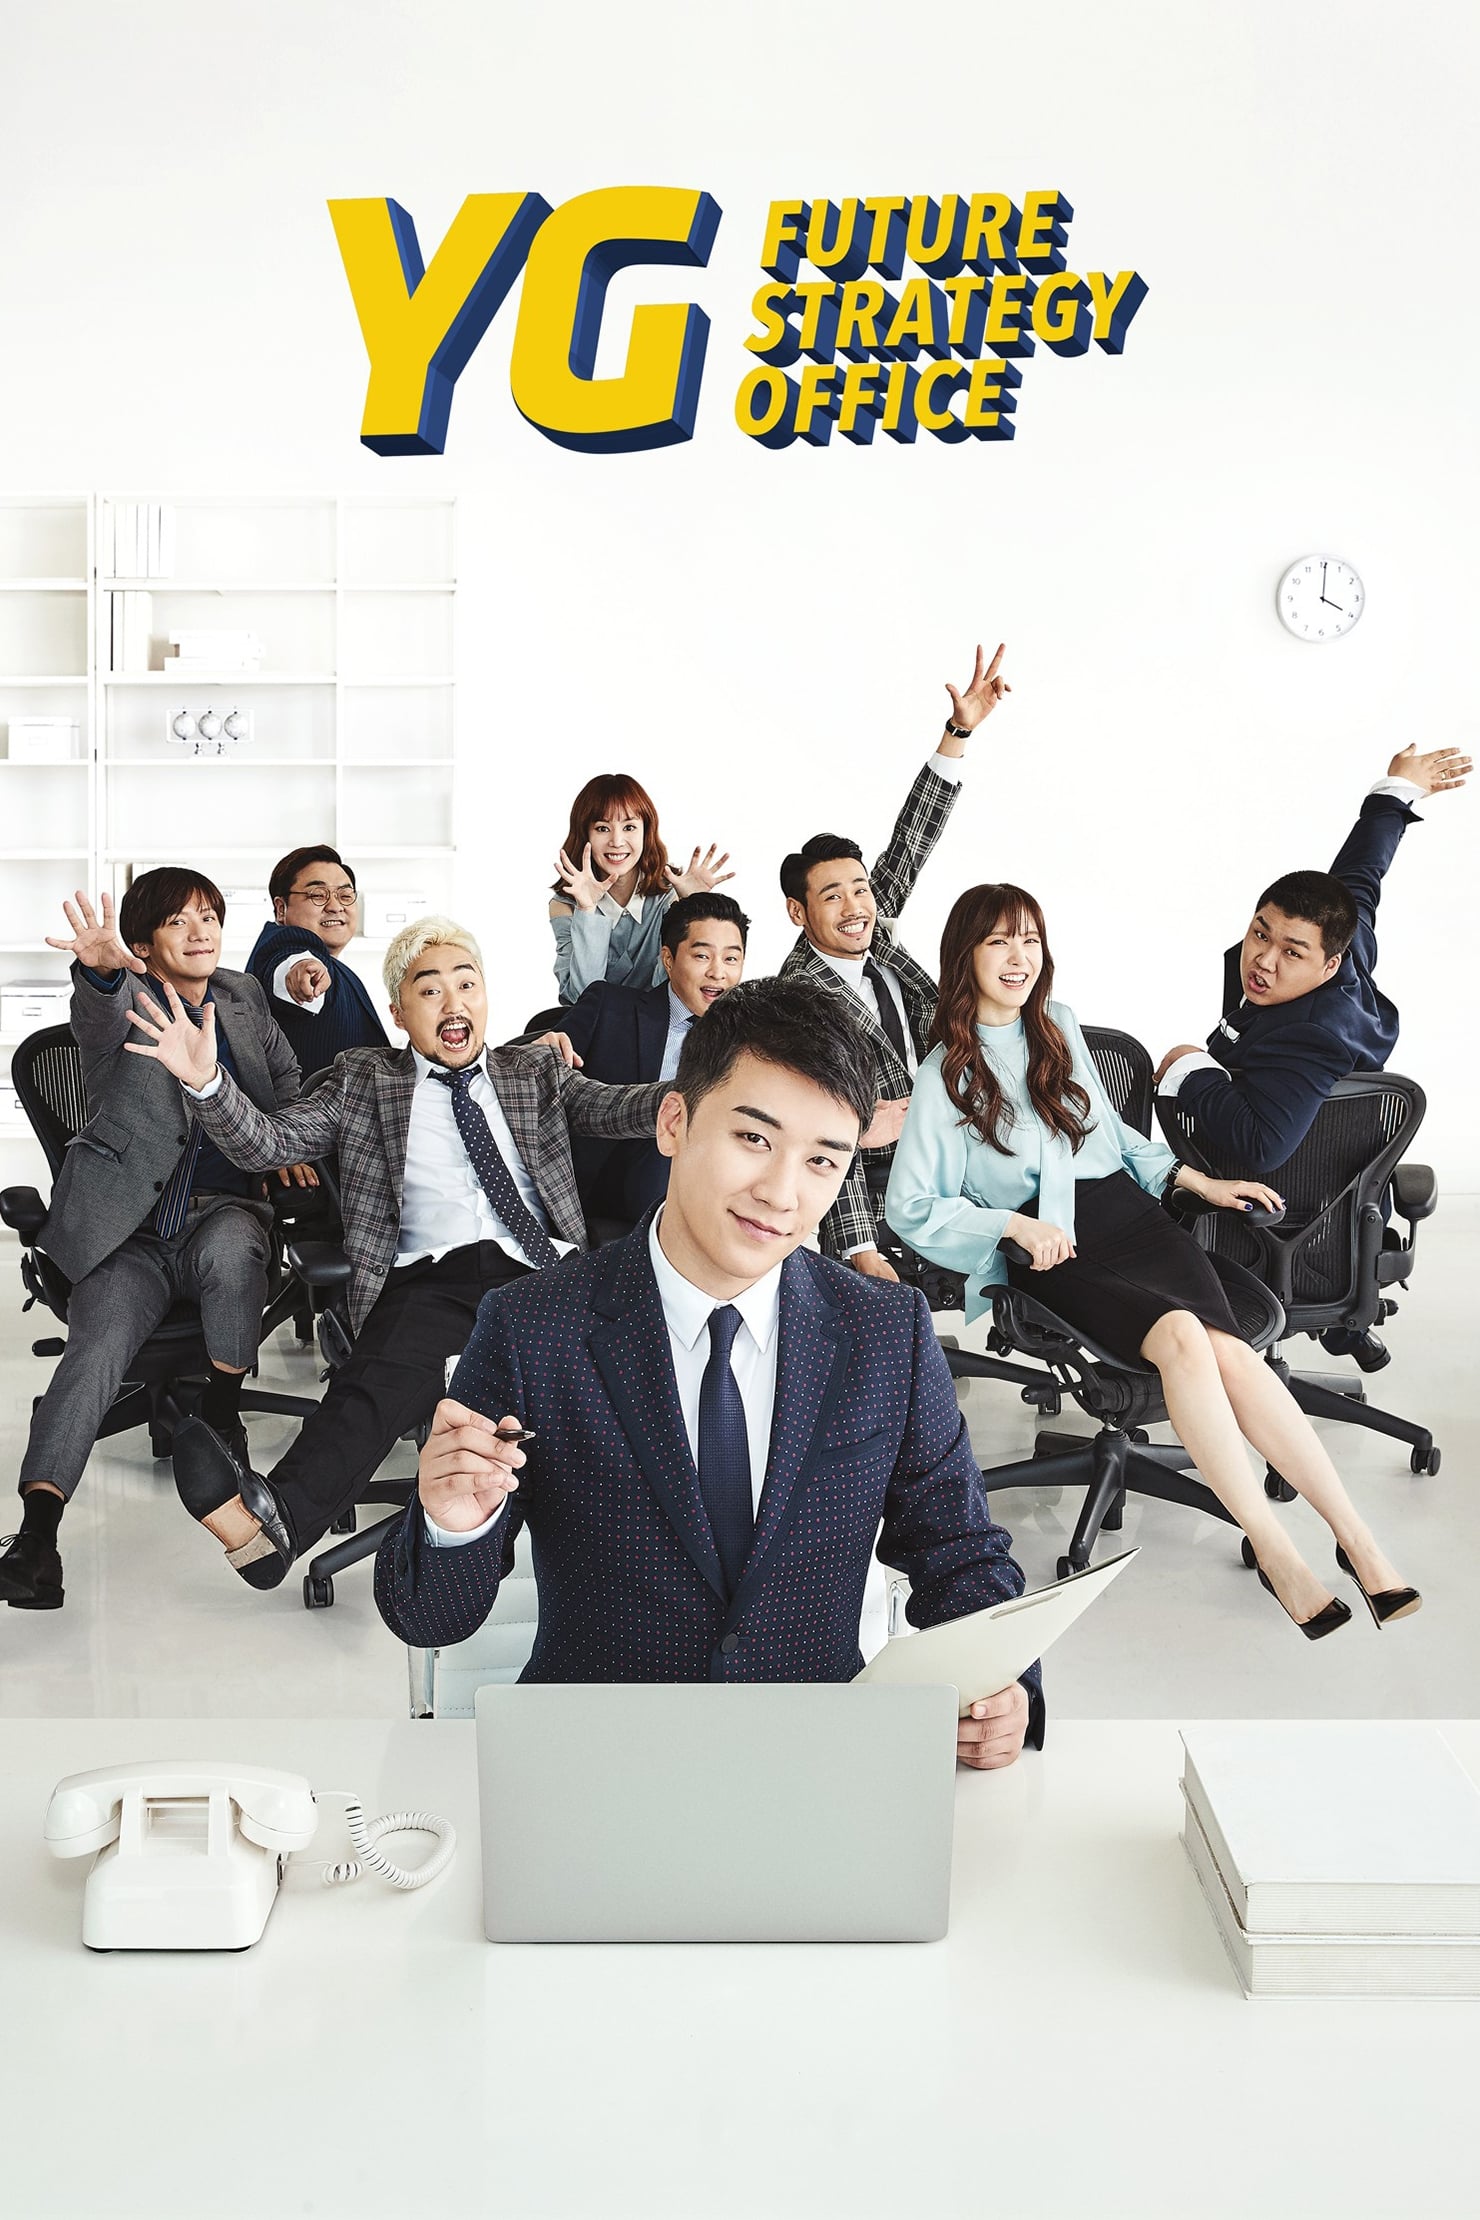 YG Future Strategy Office (2018)